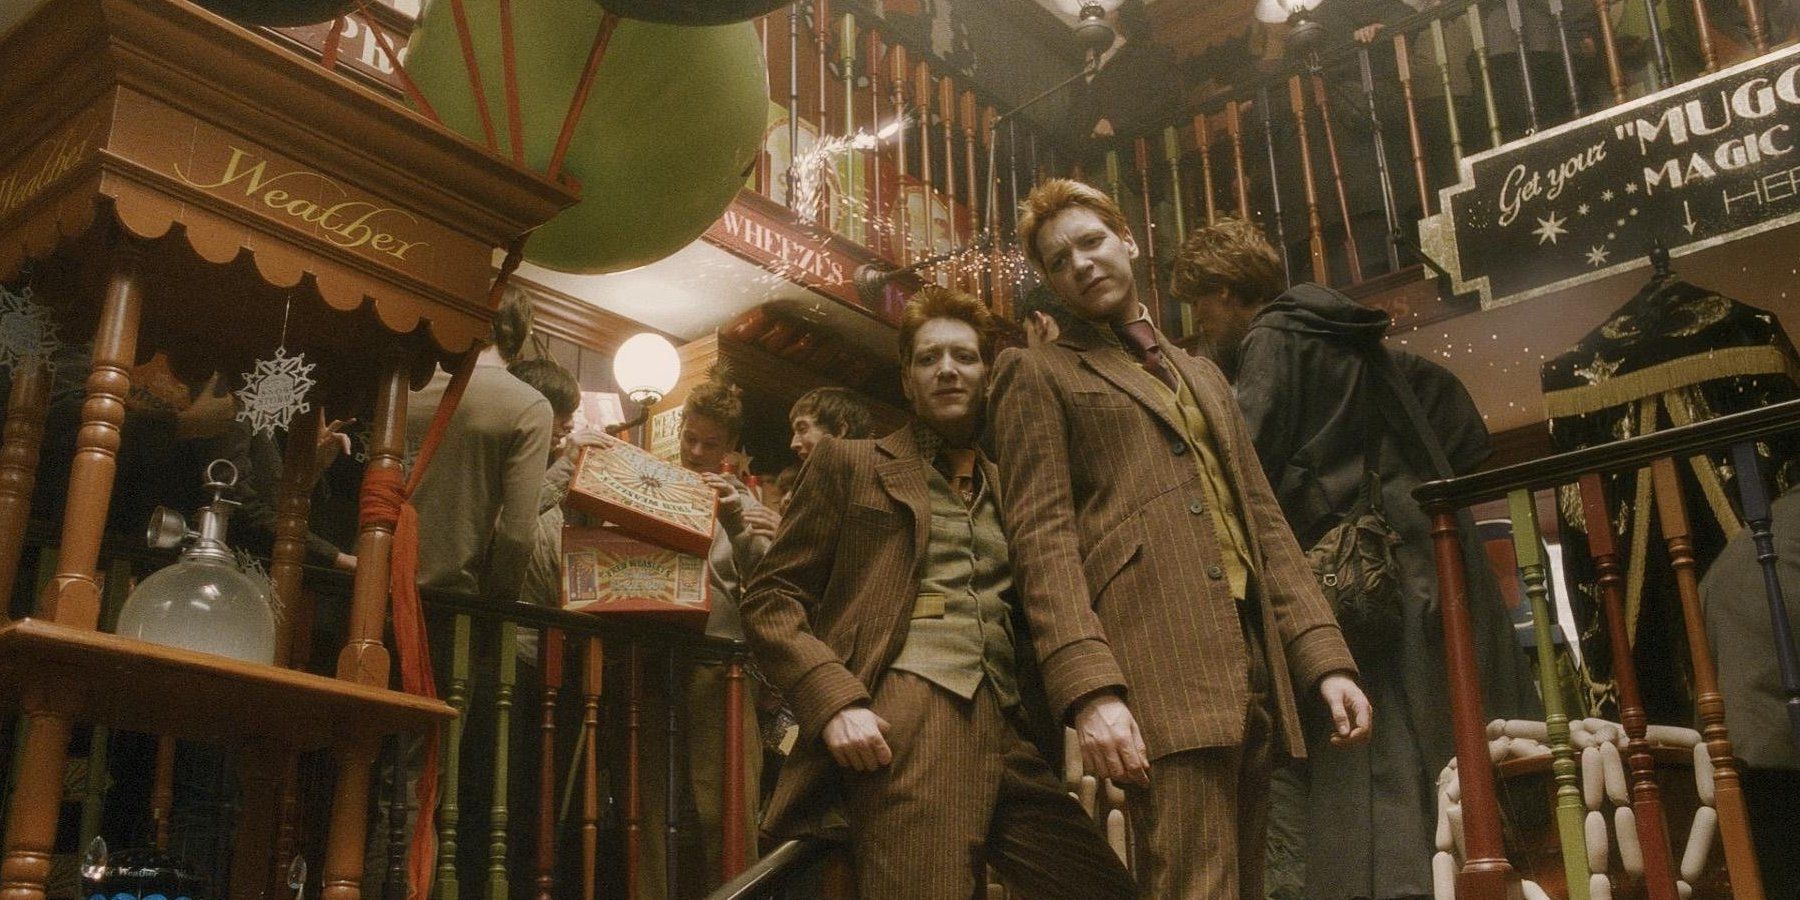 Fred and George inside Weasleys' Wizard Wheezes in Harry Potter and the Half-Blood Prince